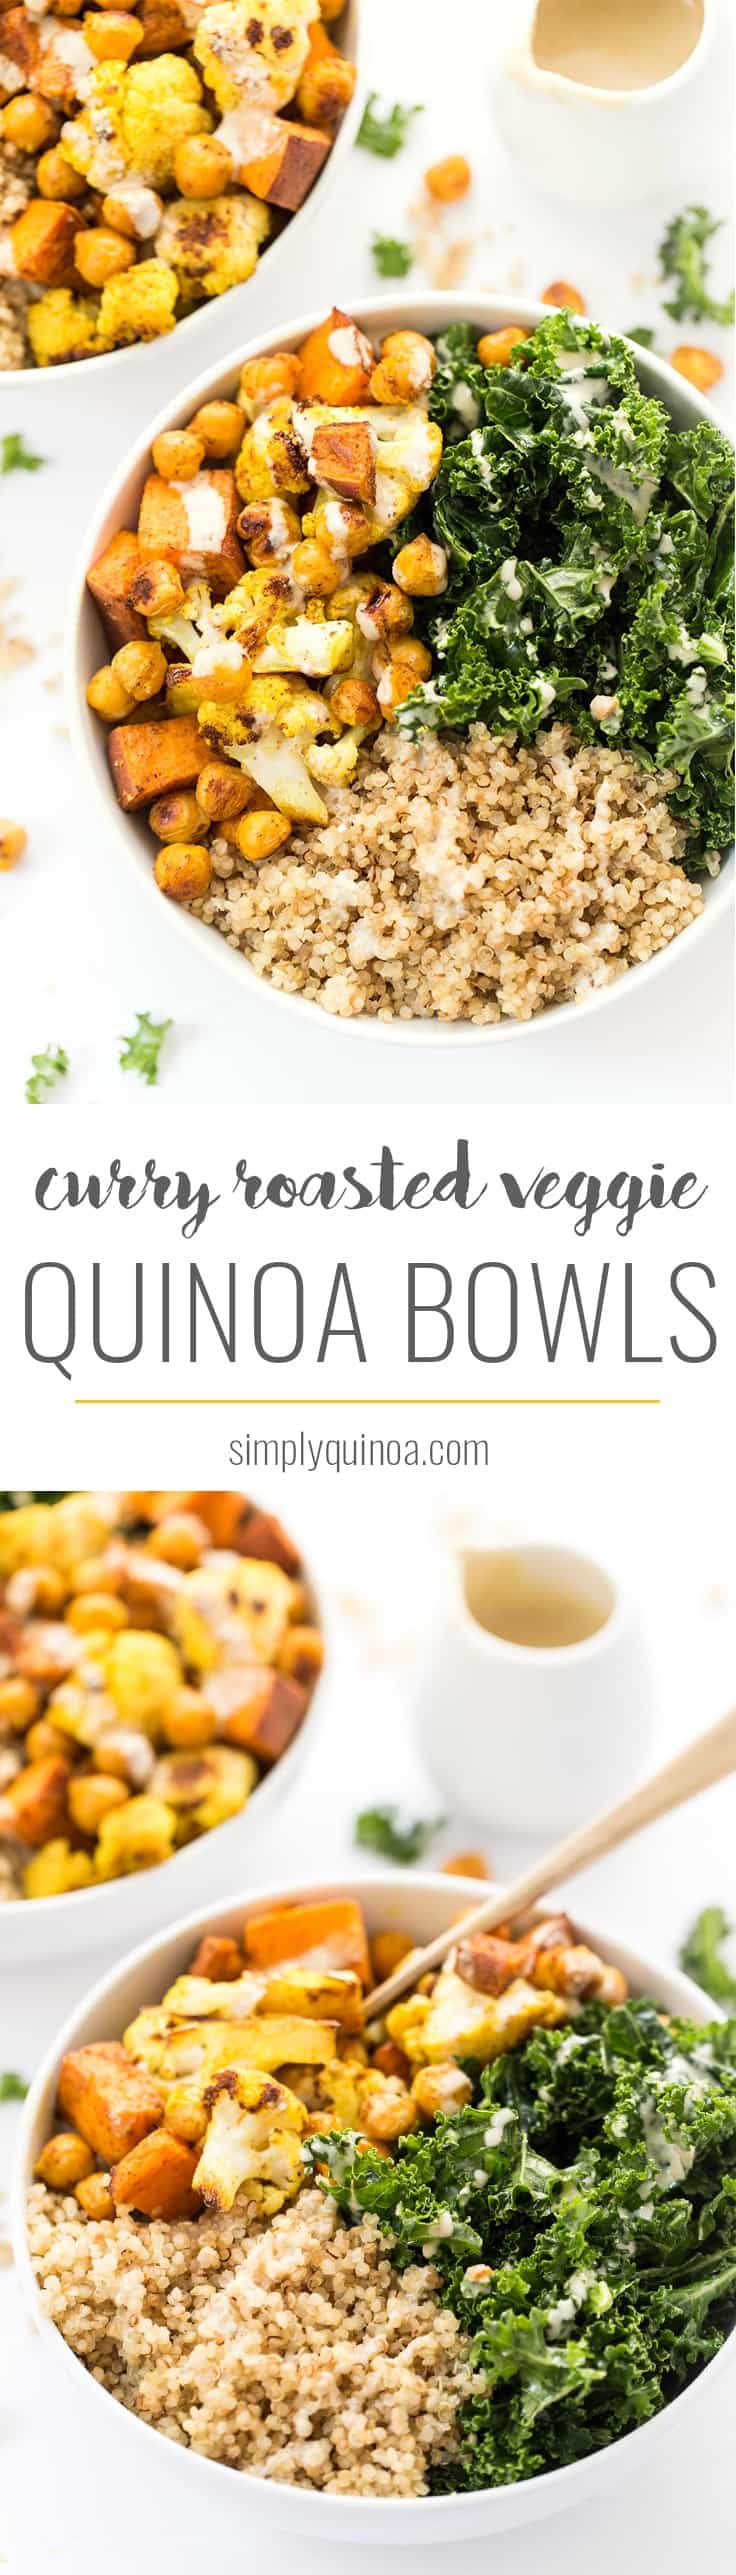 These HEALTHY curry roasted vegetable quinoa bowls are the perfect meal - easy to make, packed with protein, filled with veggies and amazing flavors from the spices!